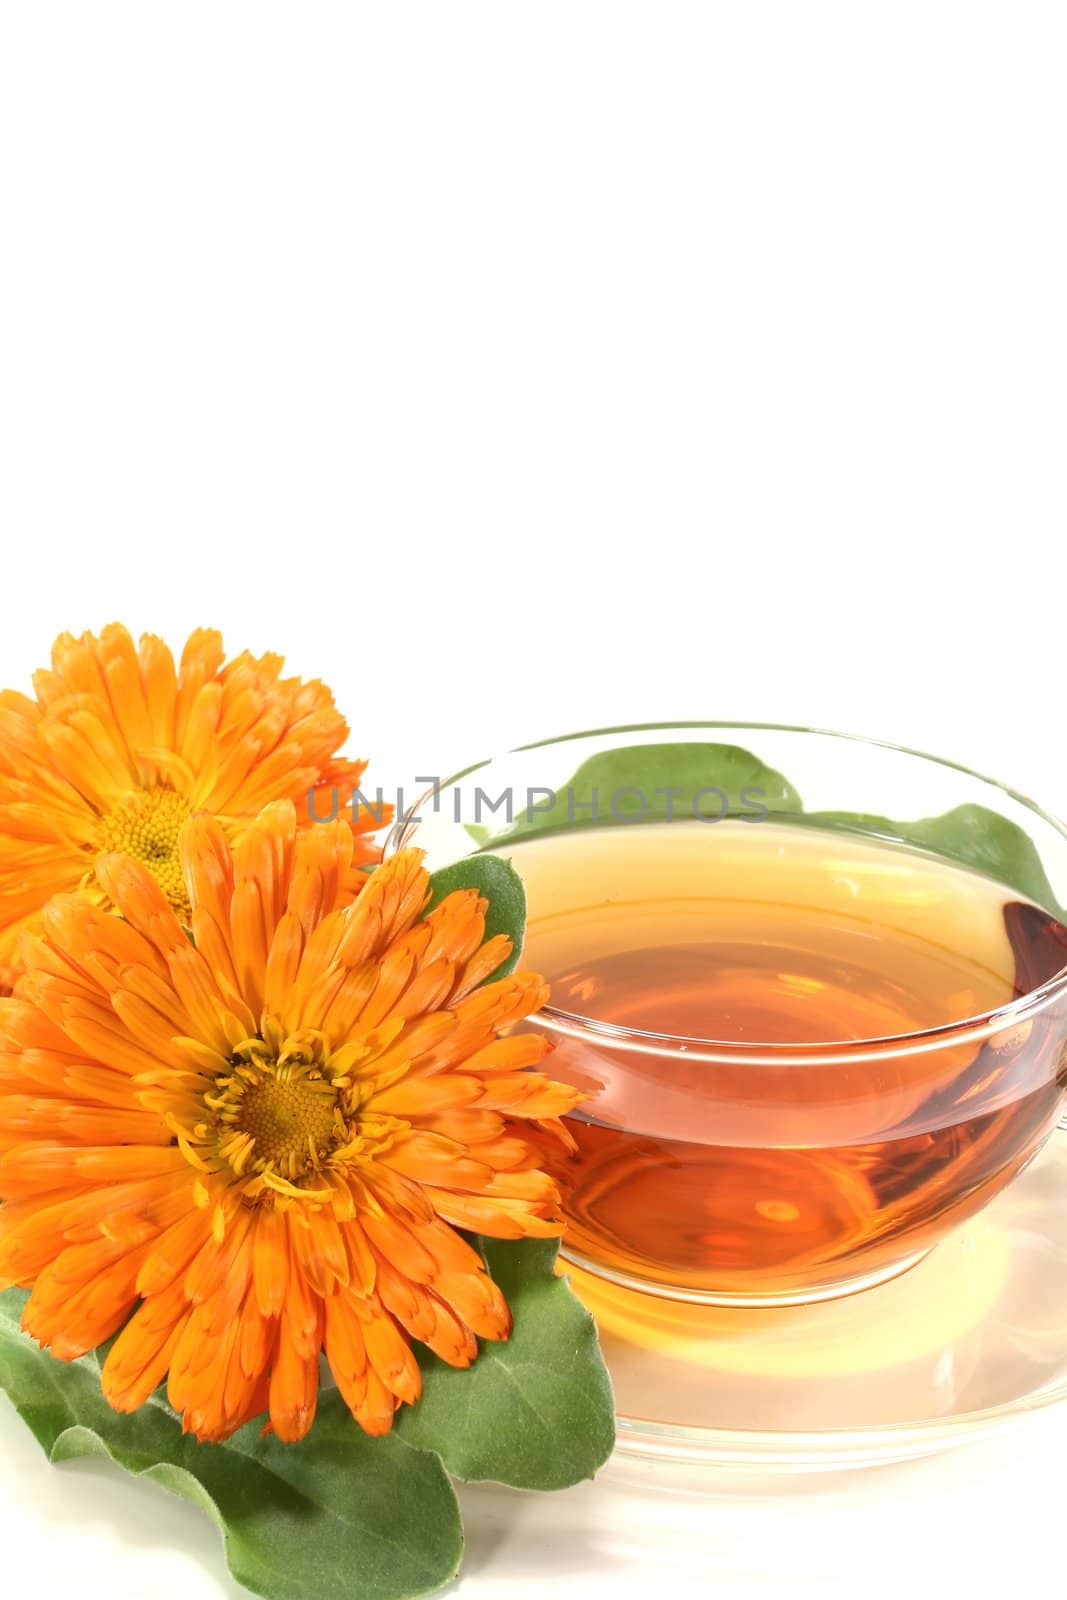 Marigold tea with flowers and leaves by discovery